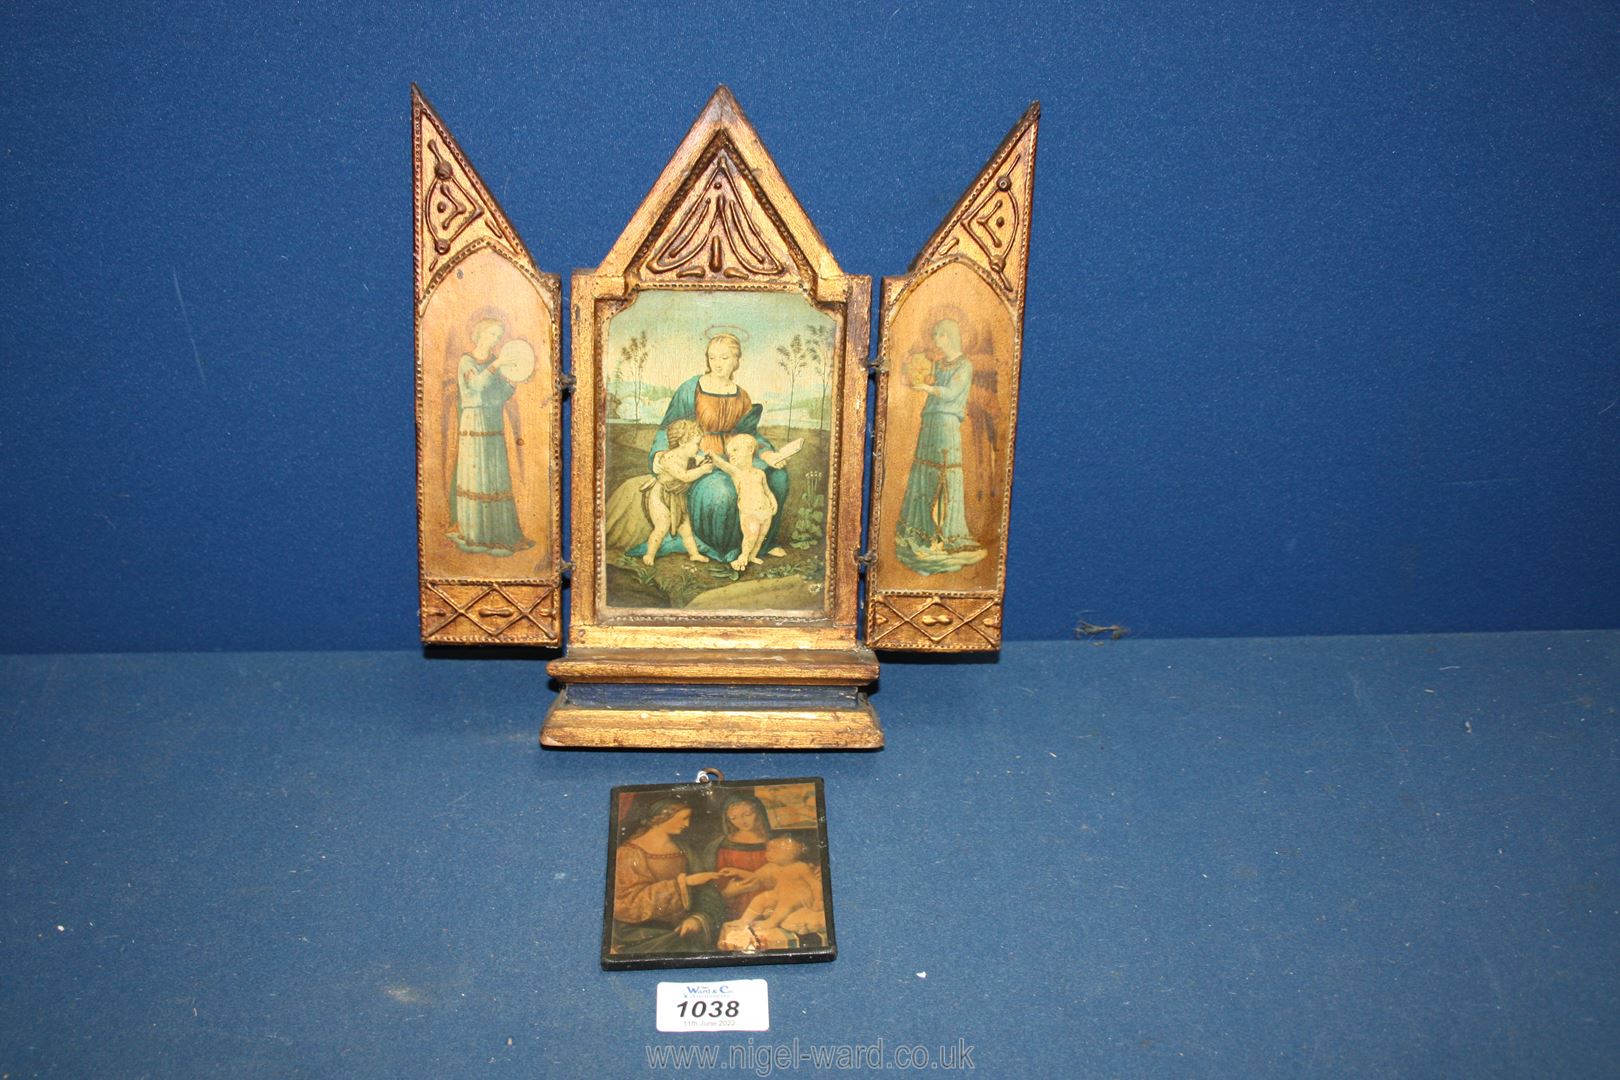 A gilded wood Tryptic with printed scenes depicting religious figures with angels on the outer